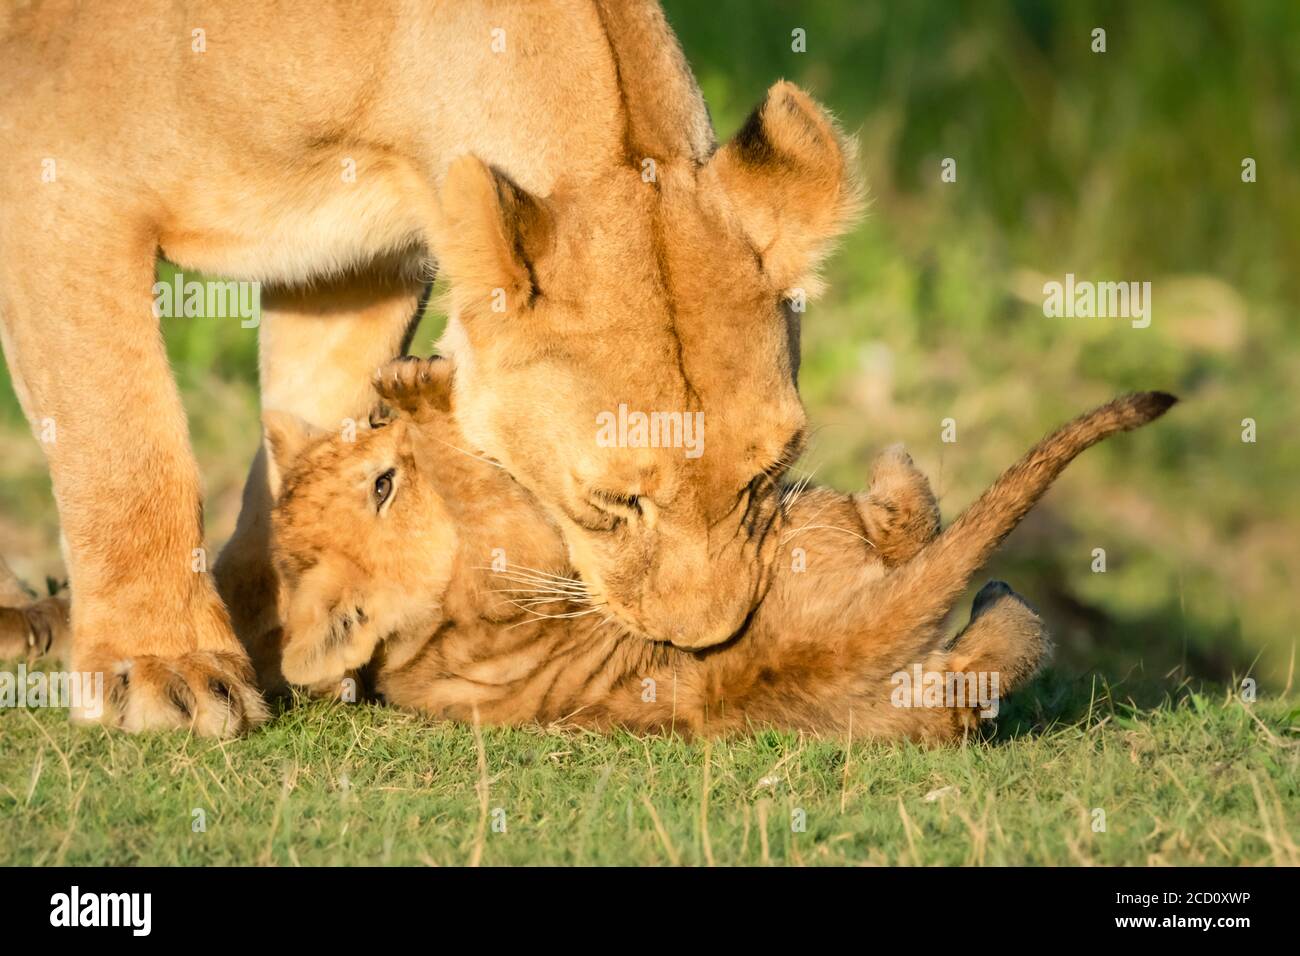 Close-up of lioness (Panthera leo) play fighting with cub on grass on a sunny day; Tanzania Stock Photo